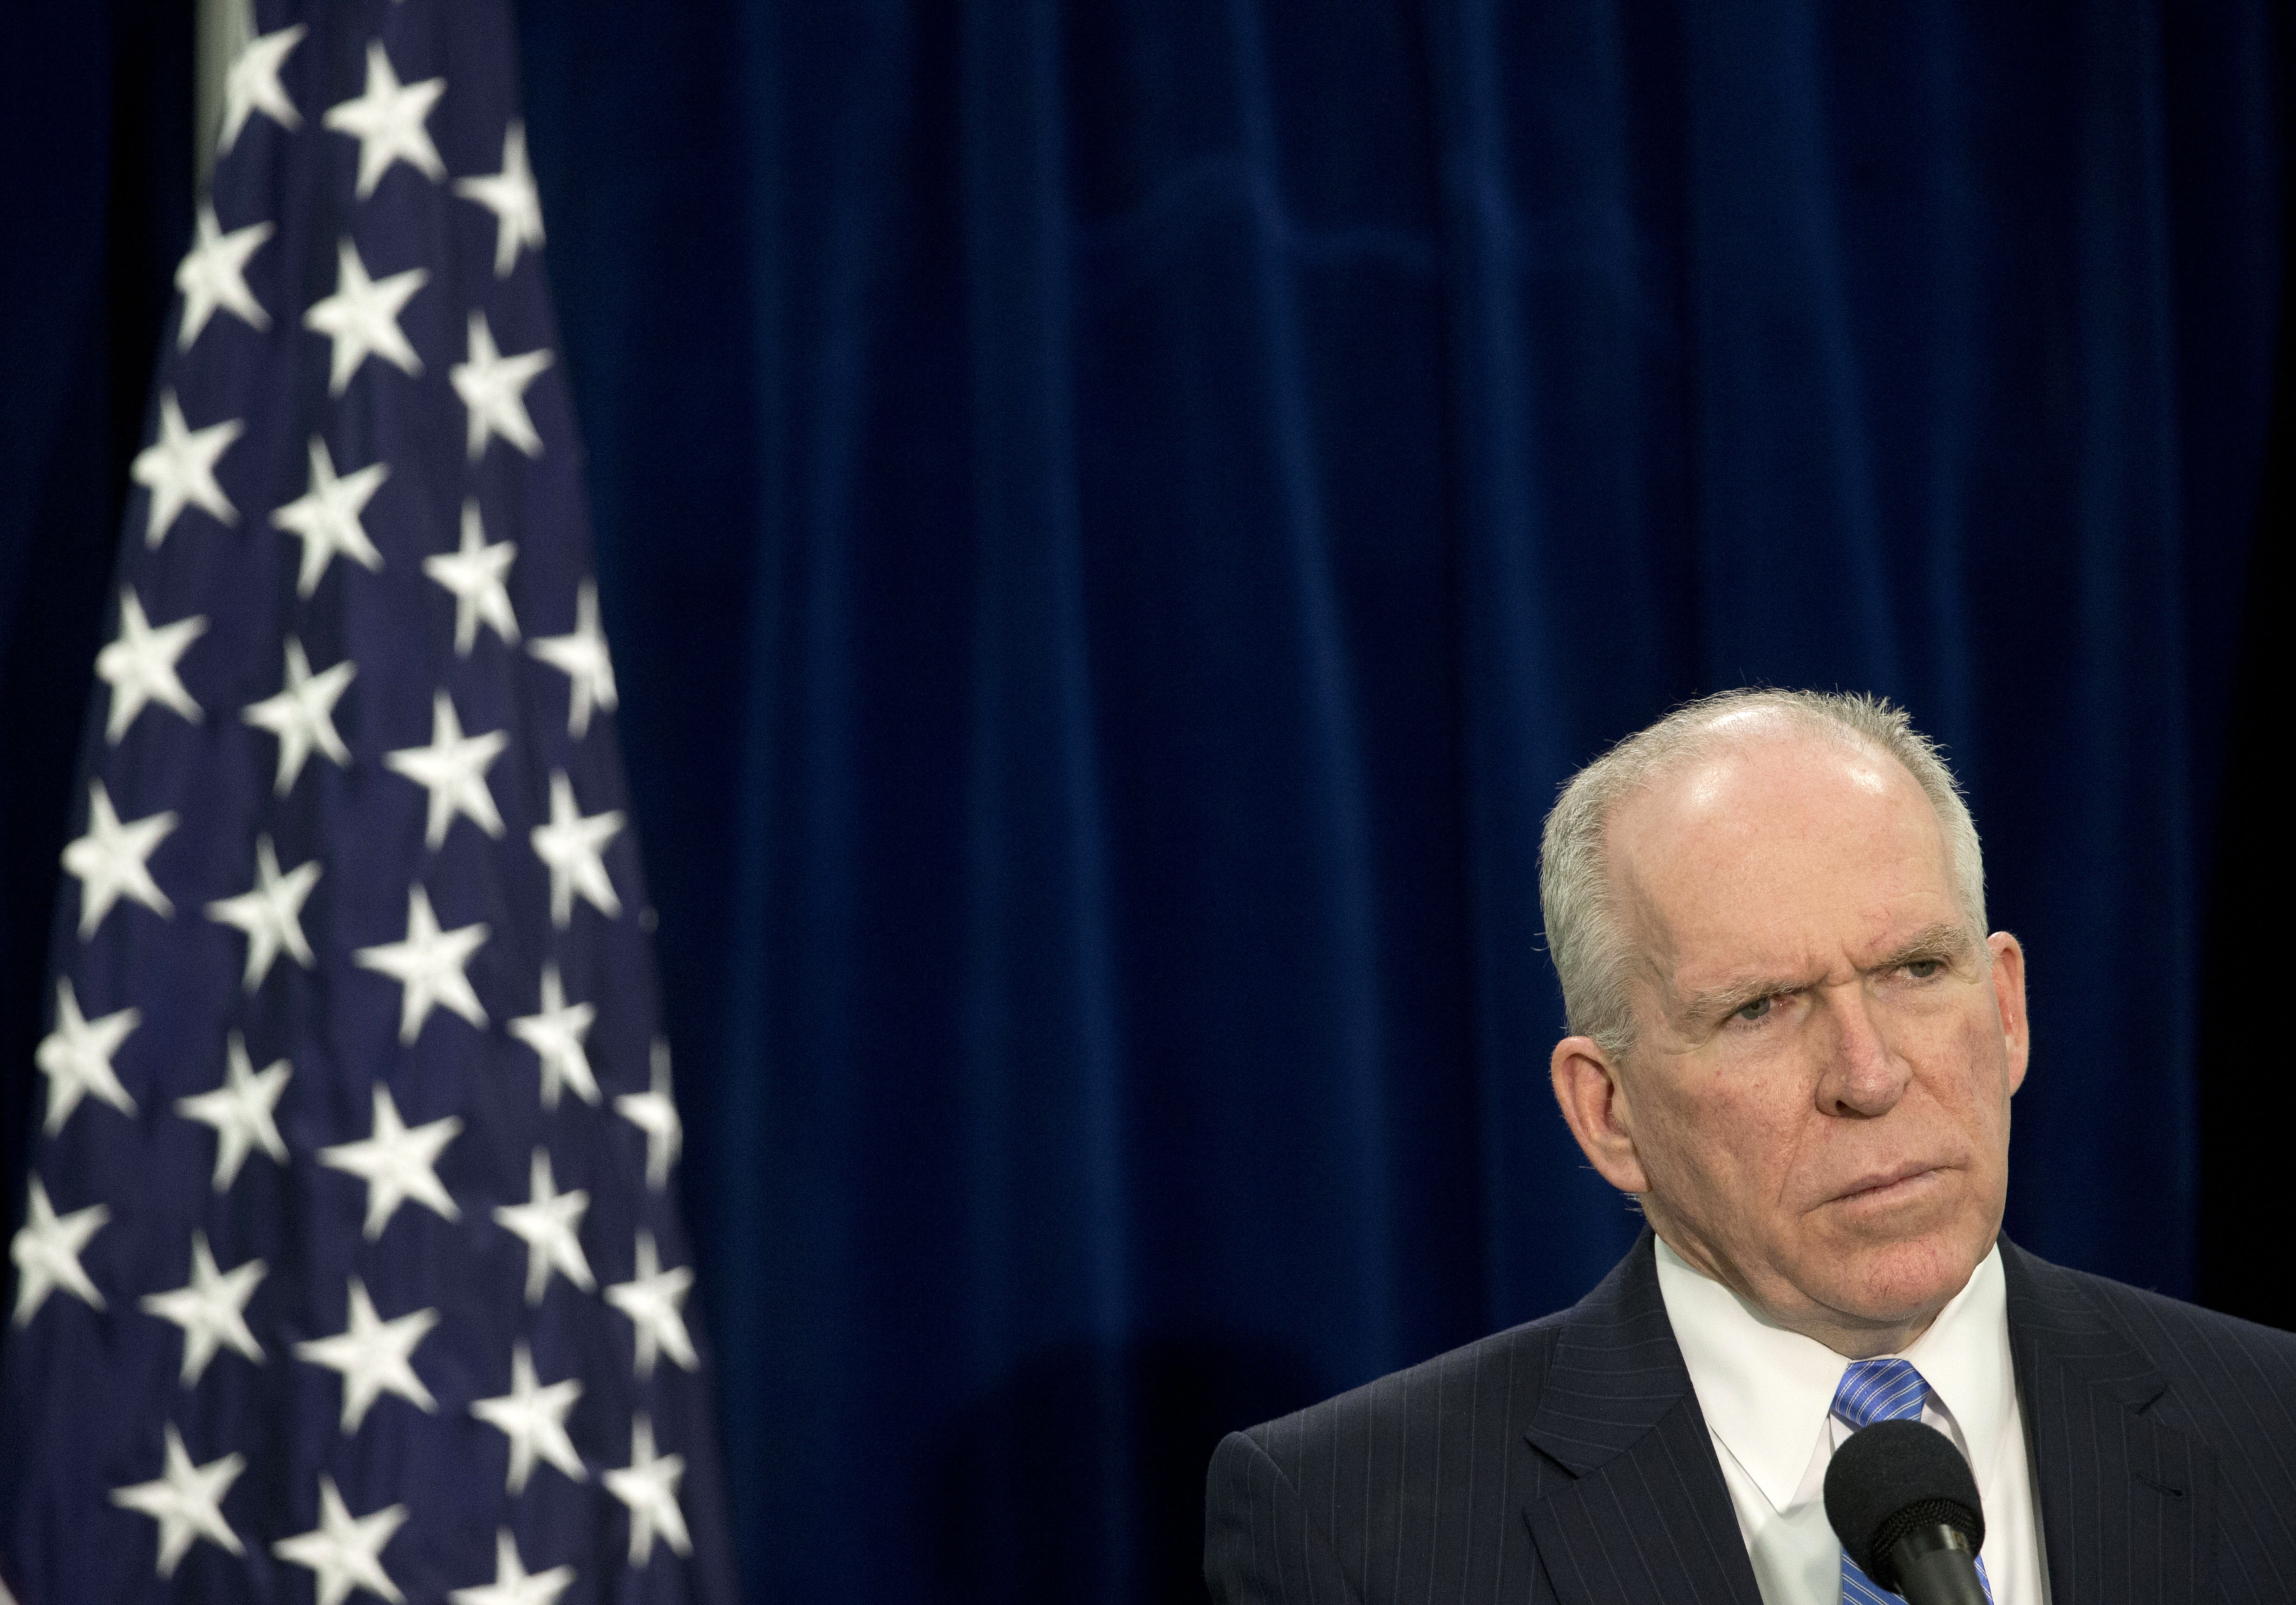 CIA Director John Brennan listens during a news conference at CIA headquarters in Langley, Va., in December 2014. Pablo Martinez Monsivais/AP